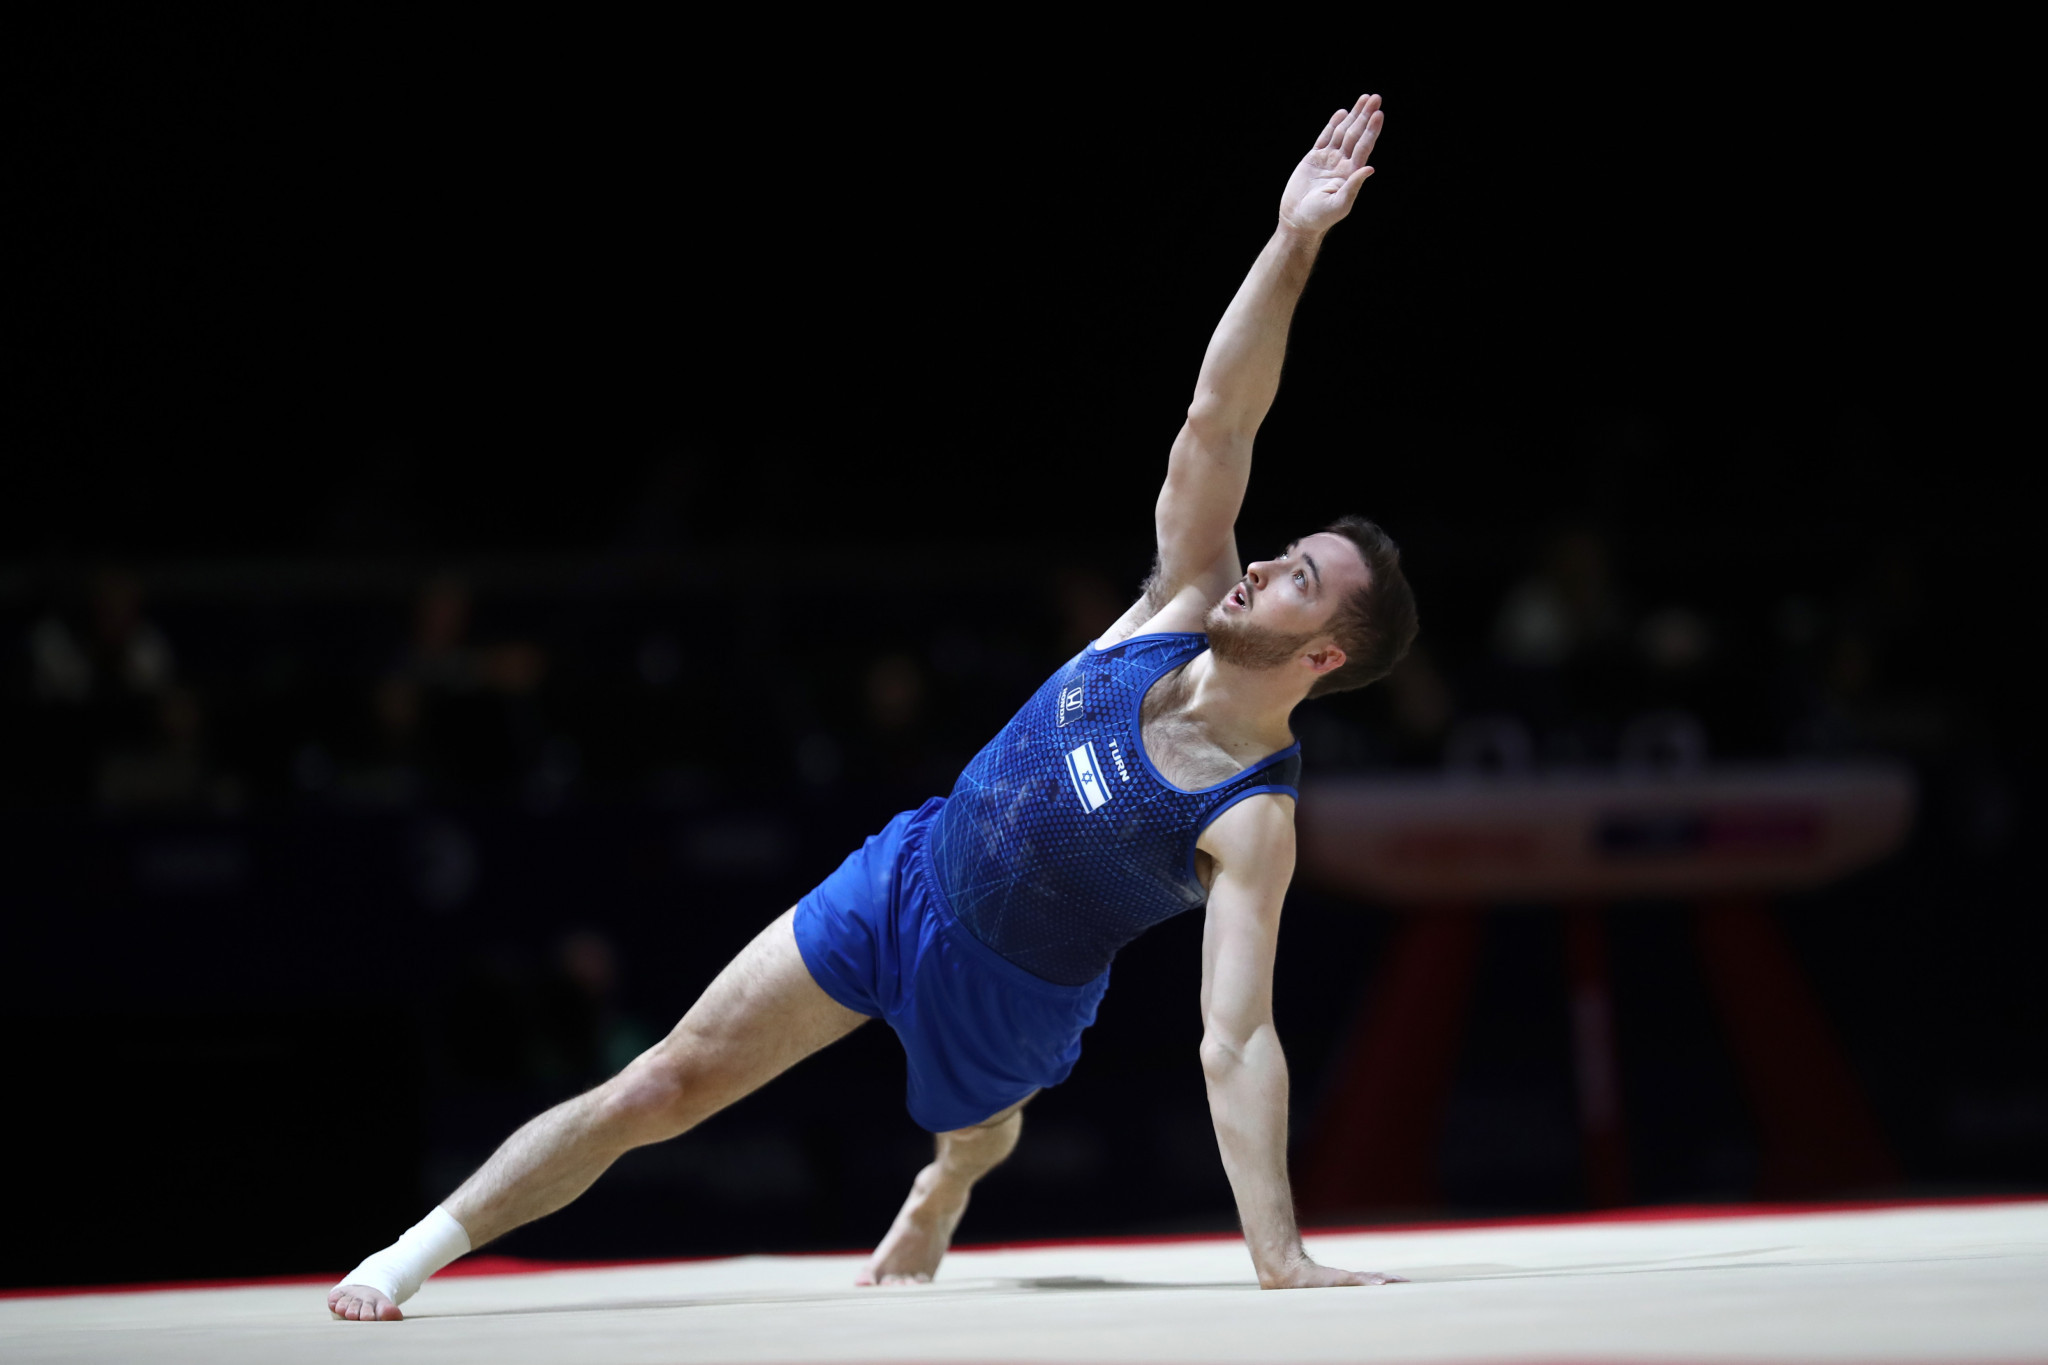 Israel’s Artem Dolgopyat topped the men’s floor exercise qualification standings as action begun today at the International Gymnastics Federation Individual Apparatus World Cup in Cottbus in Germany ©Getty Images